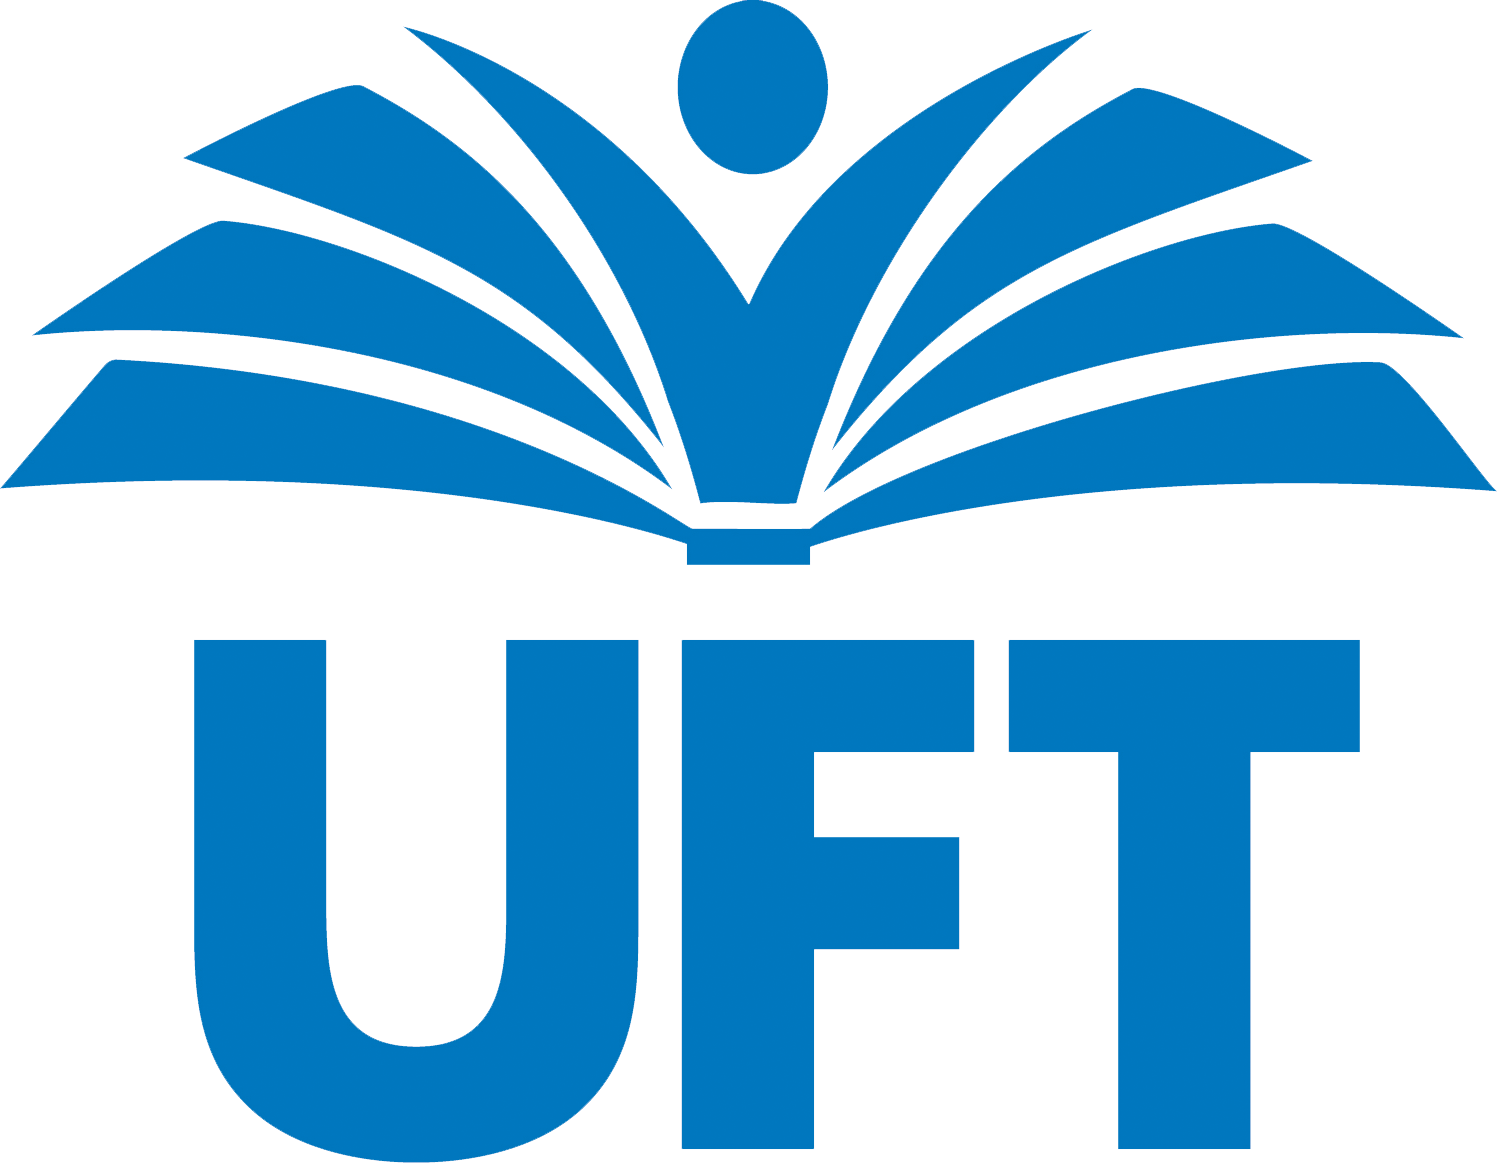 The Uft Is Made Up Of Teachers, Nurses And Other Professionals - United Federation Of Teachers (1497x1163)